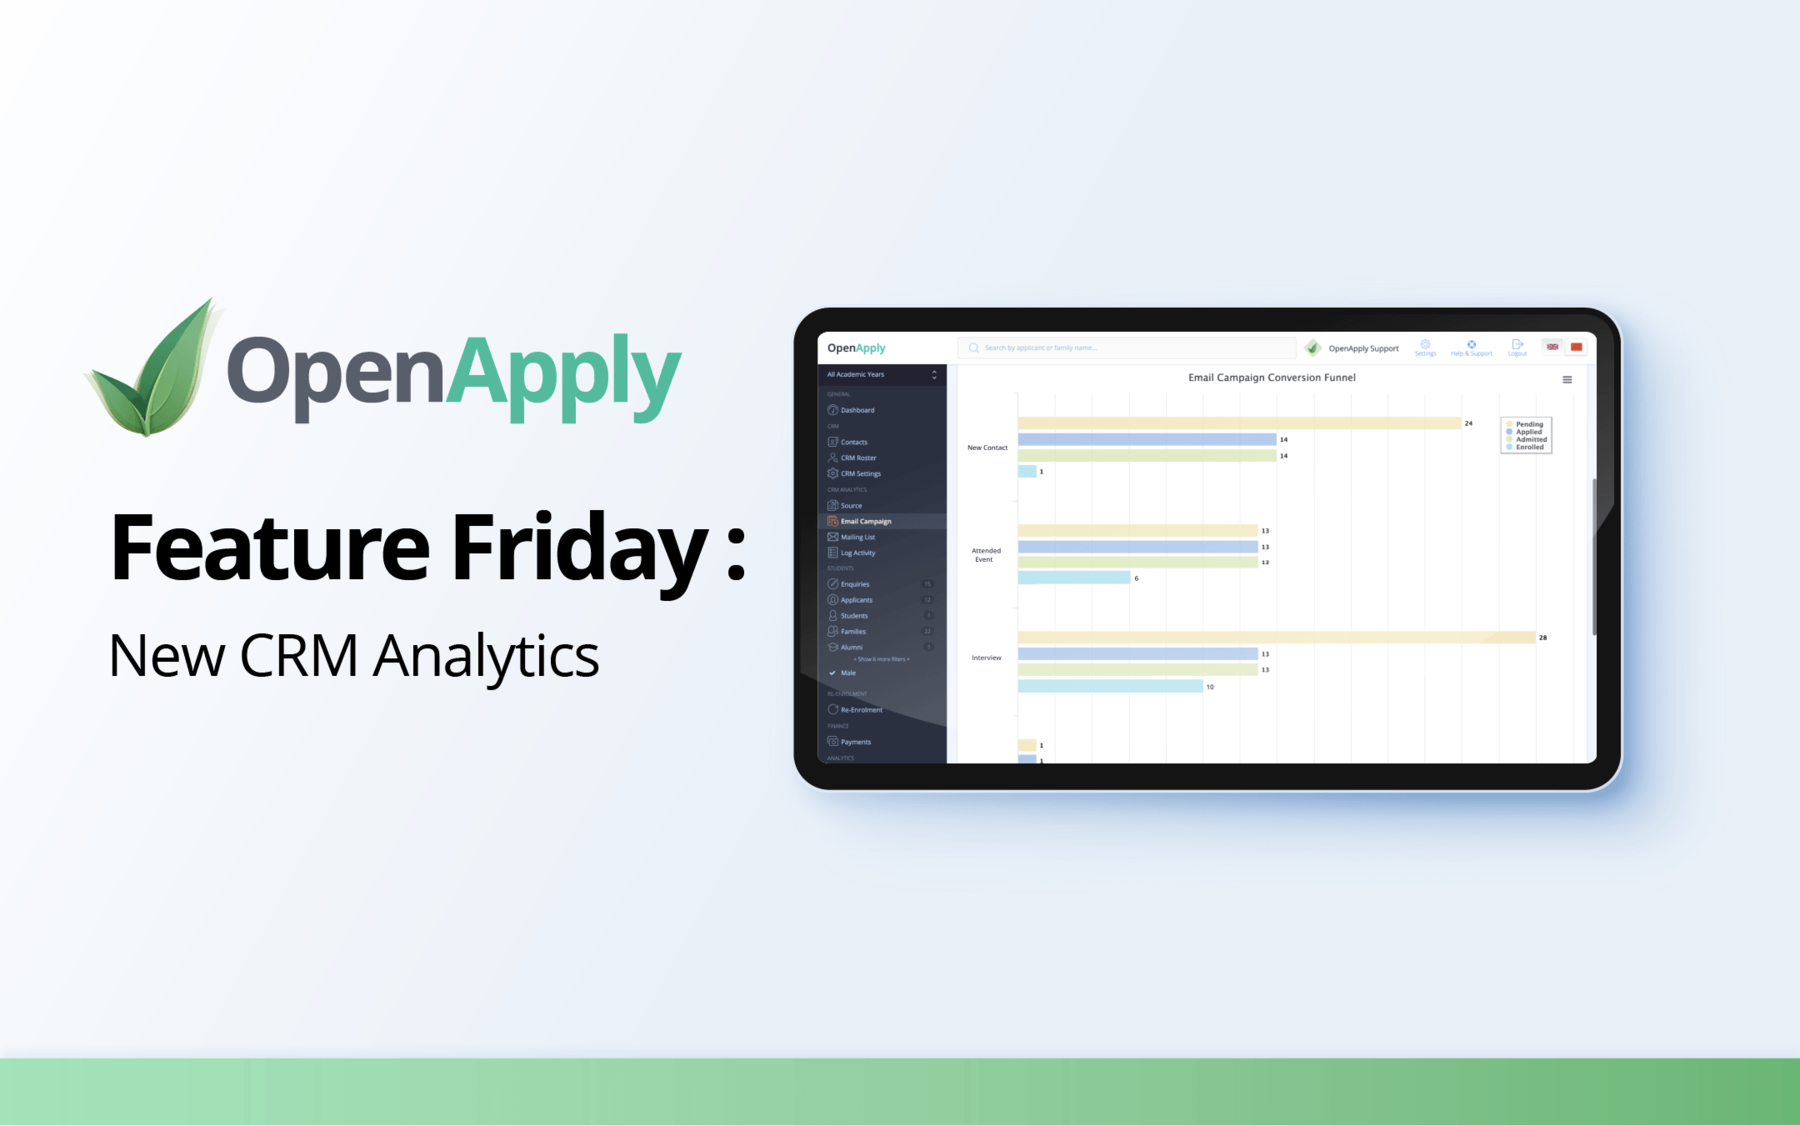 Feature Friday: New CRM Analytics